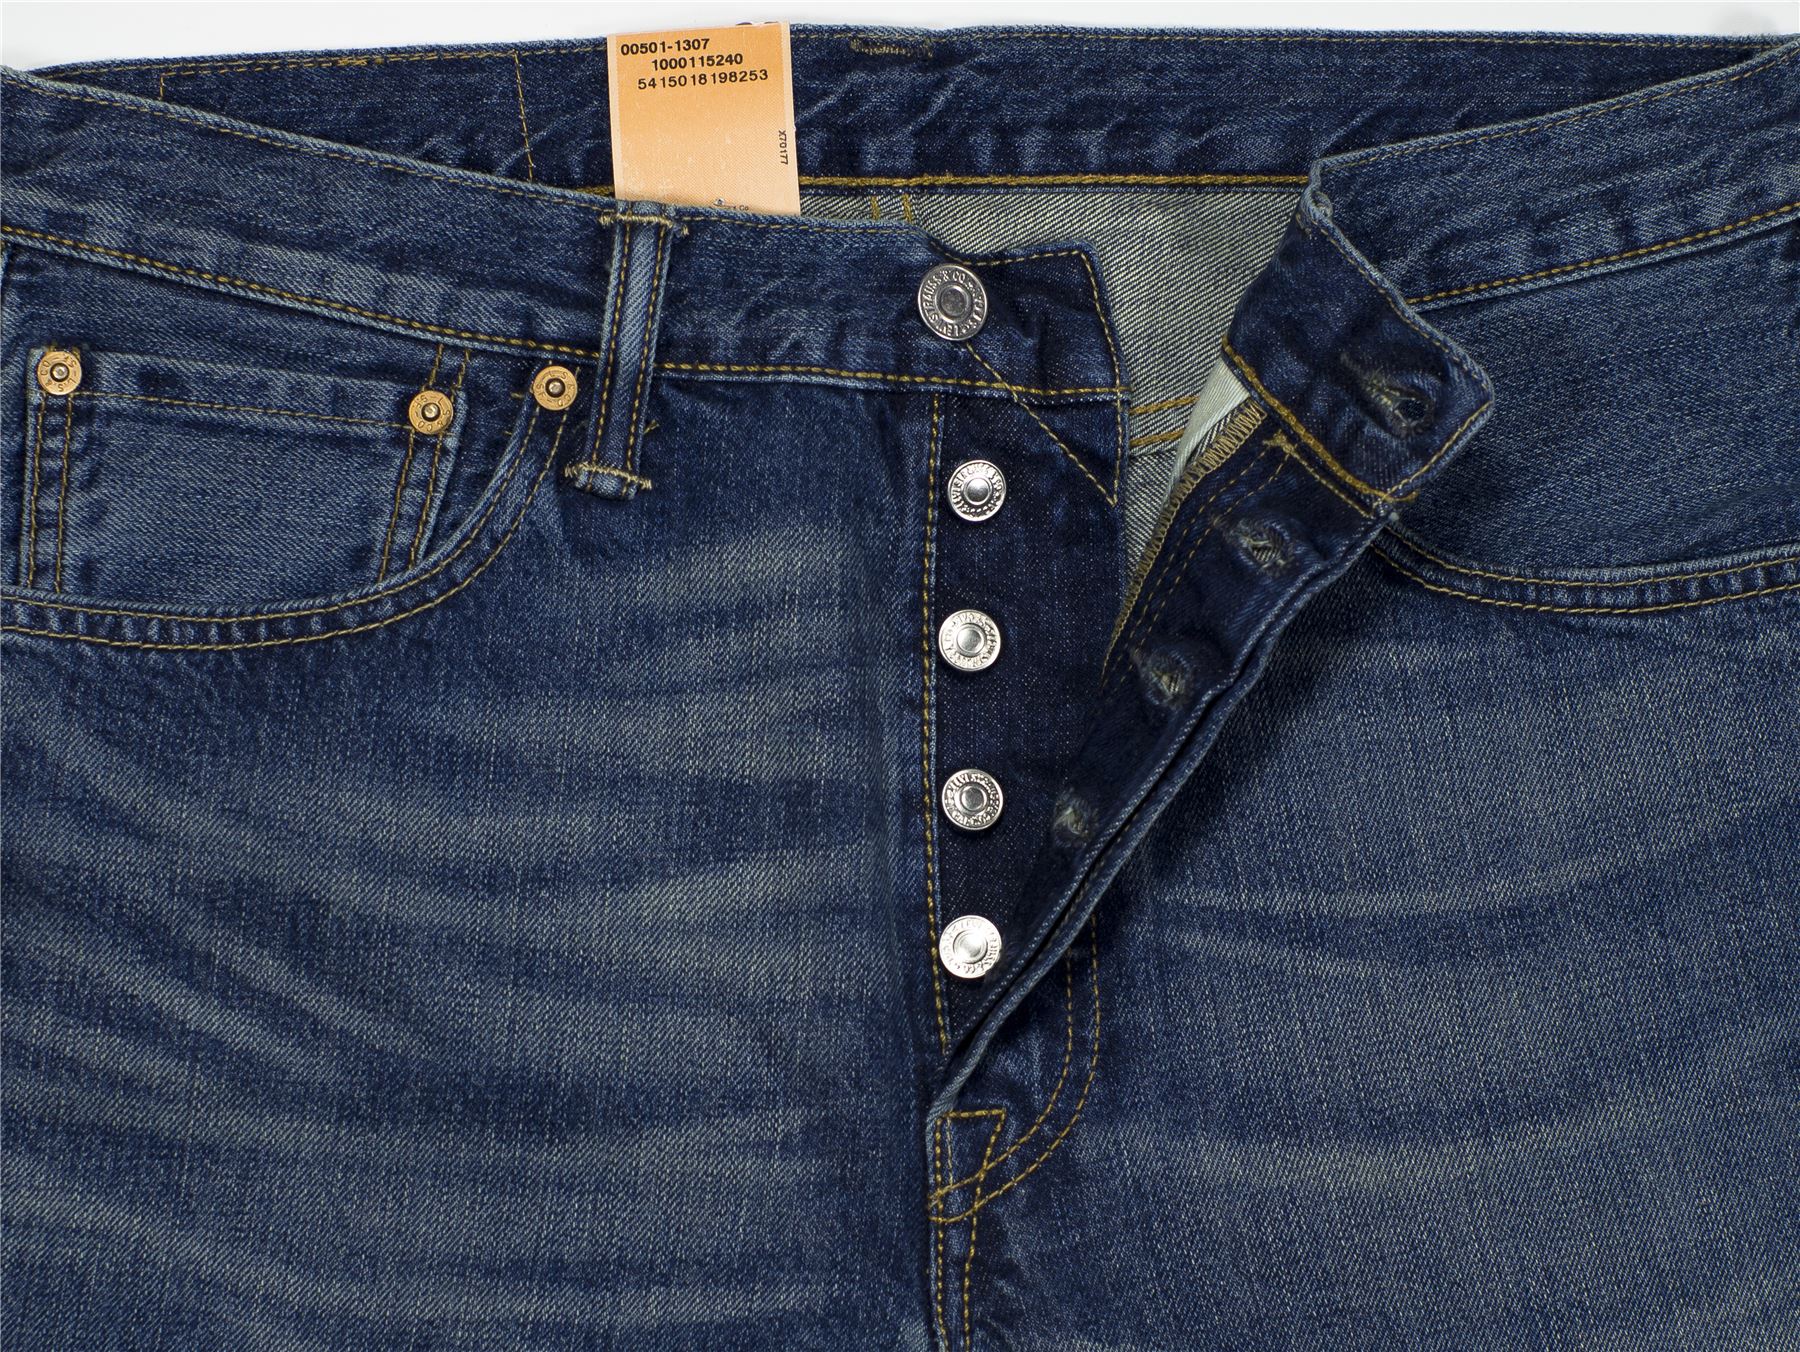 levi's button fly jeans